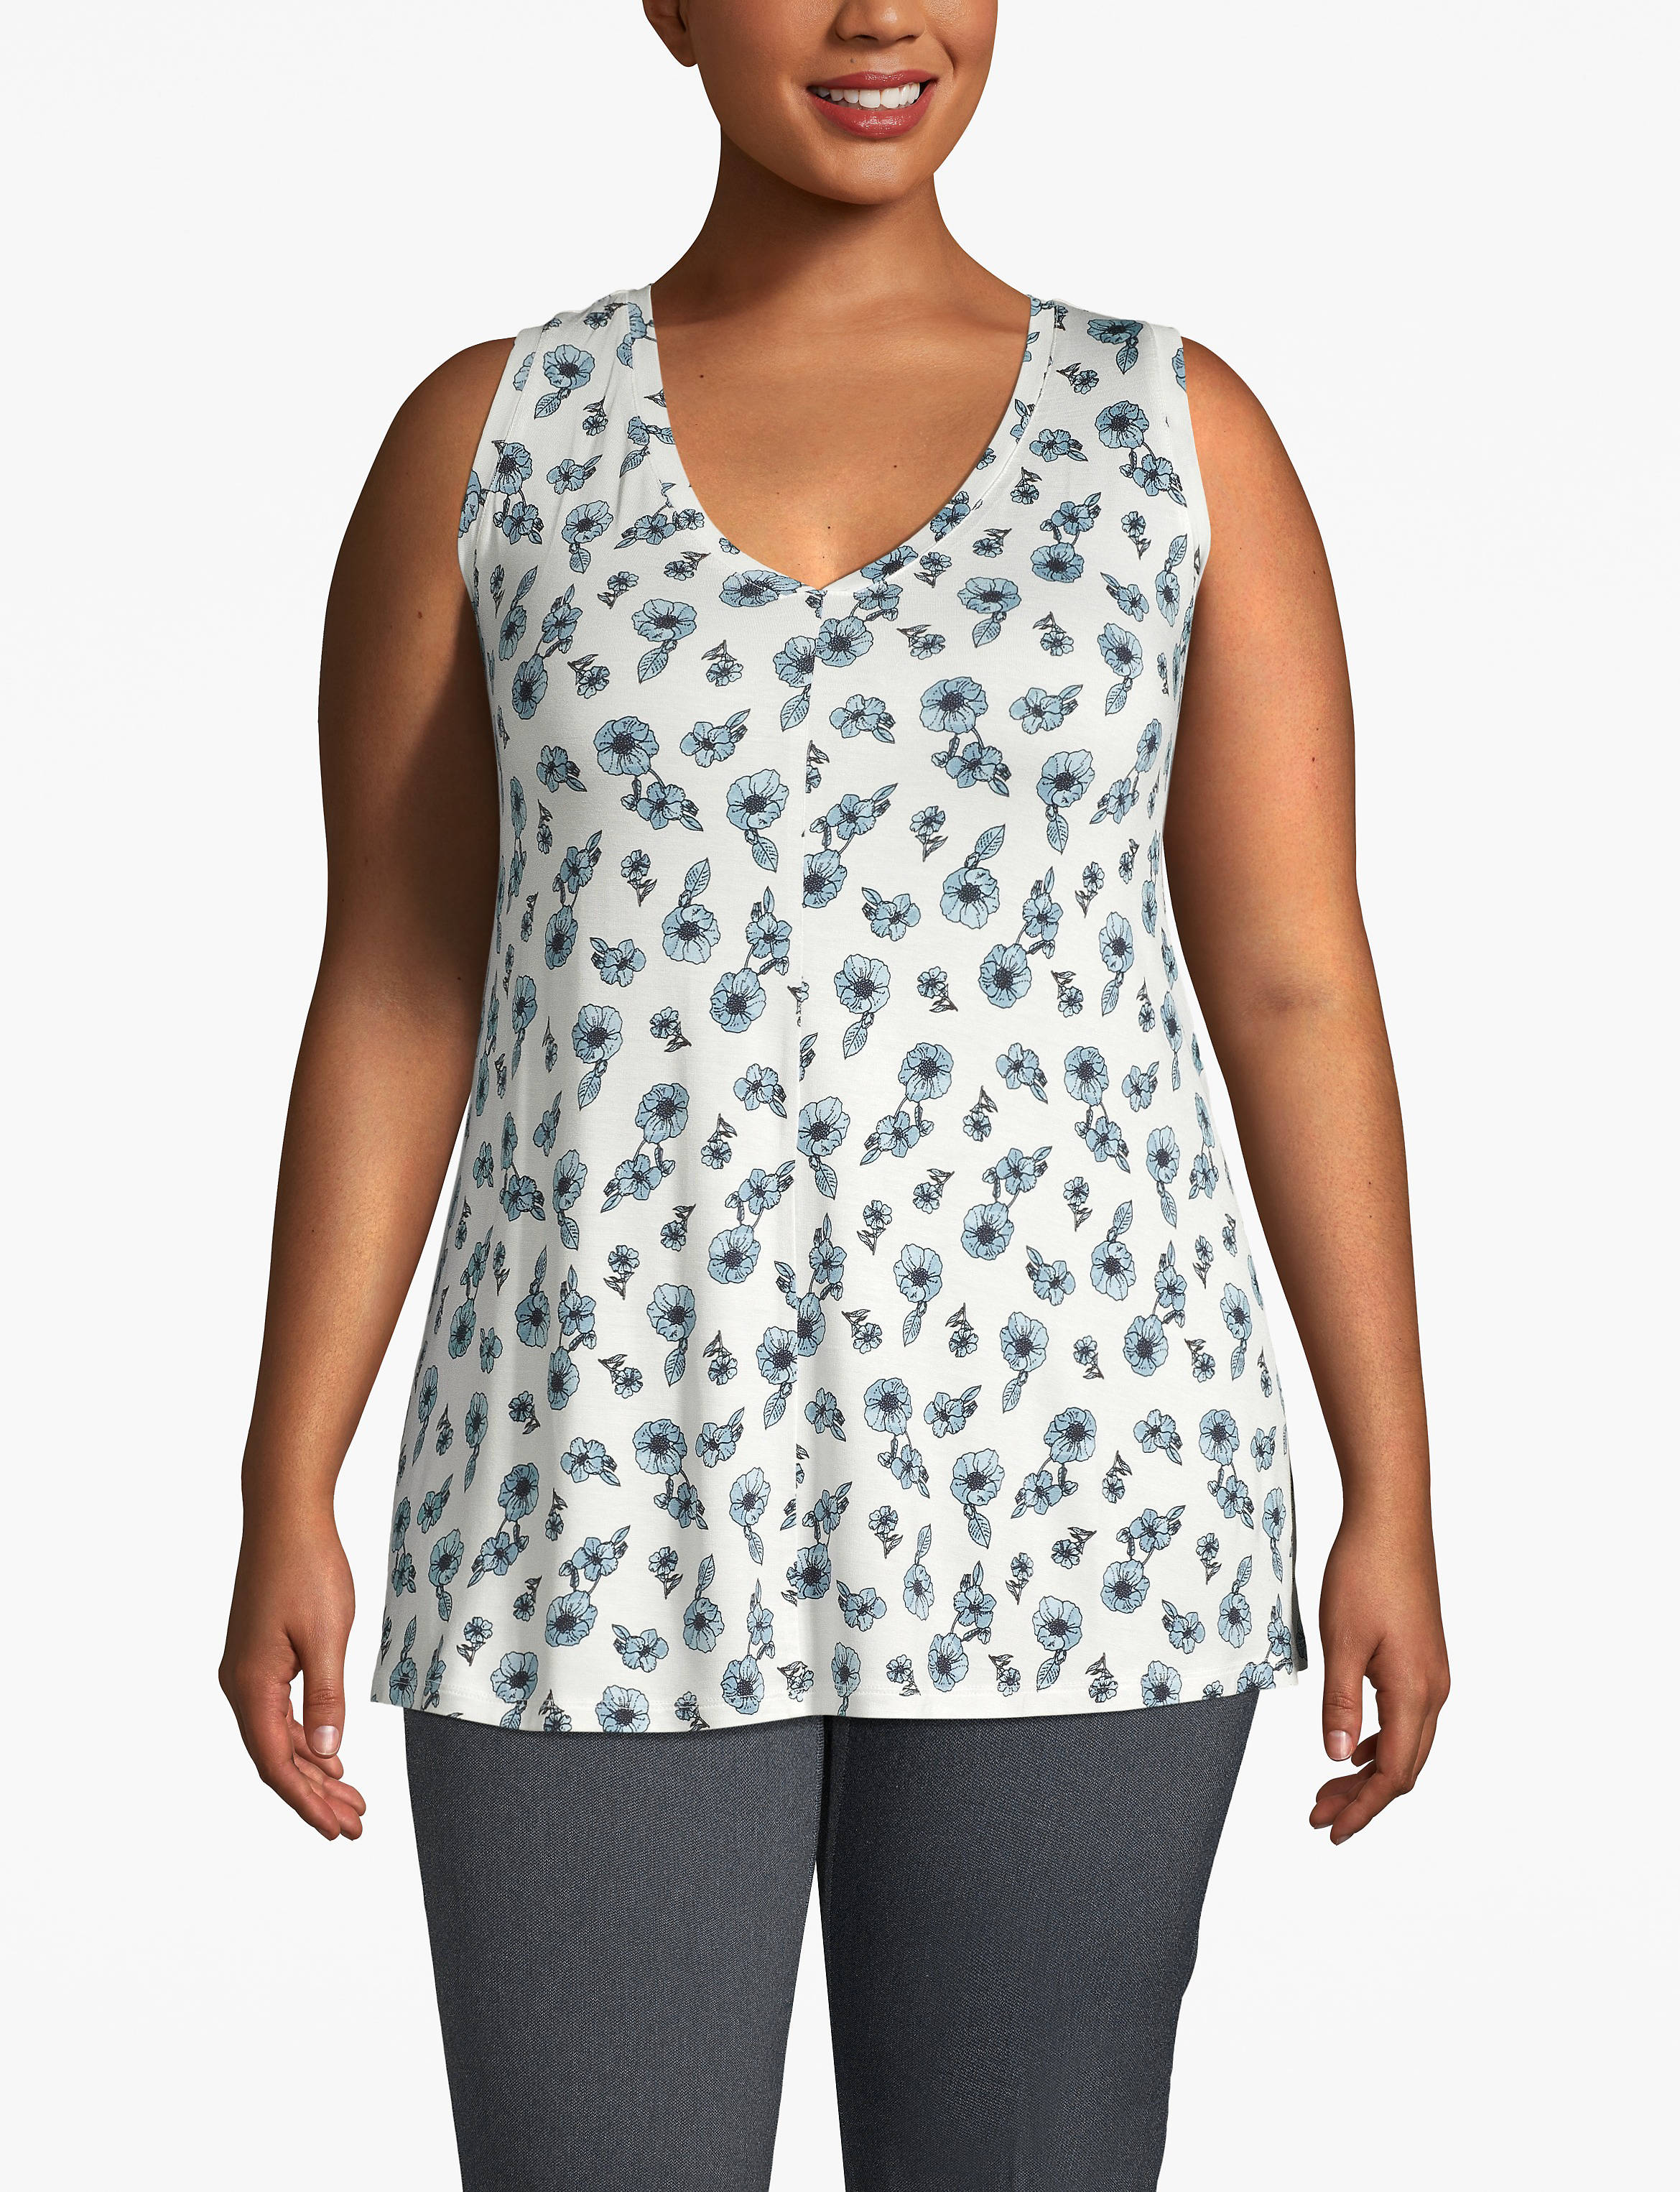 Sleeveless VNeck Swing Tank:LBF20030F_DitsyWatercolorFloral_colorway11:14/16 Product Image 1